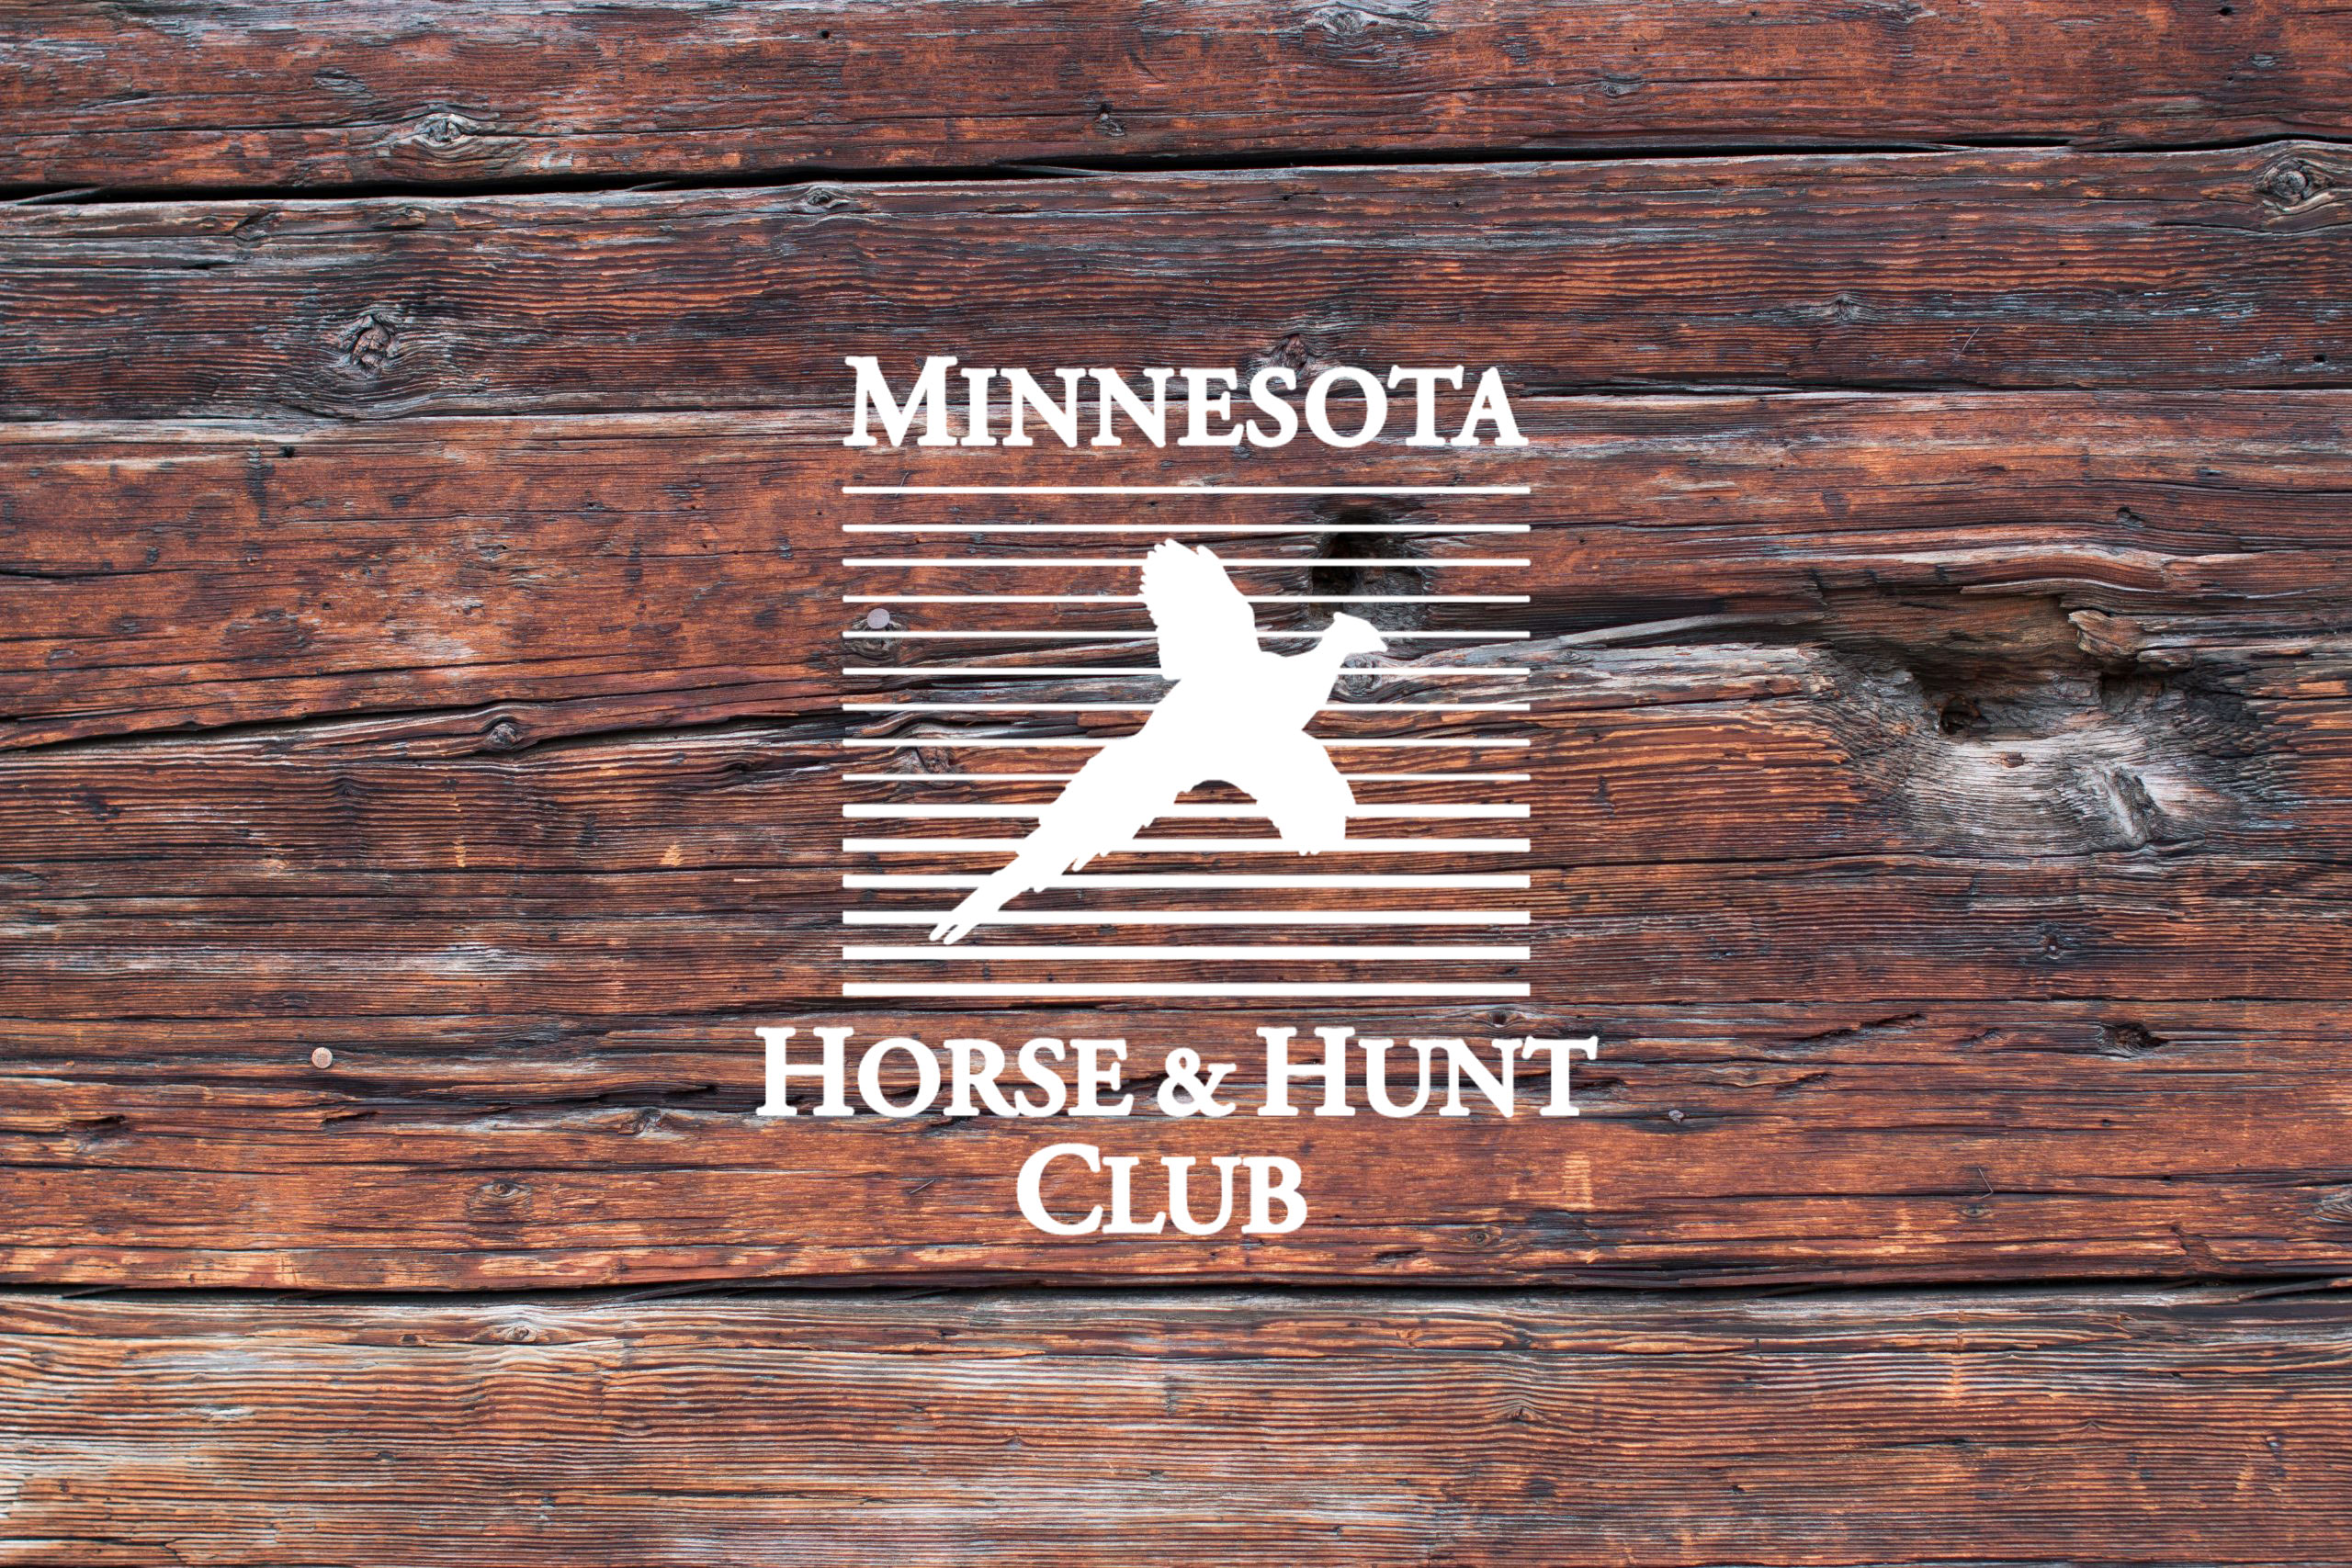 Horse and hunt club